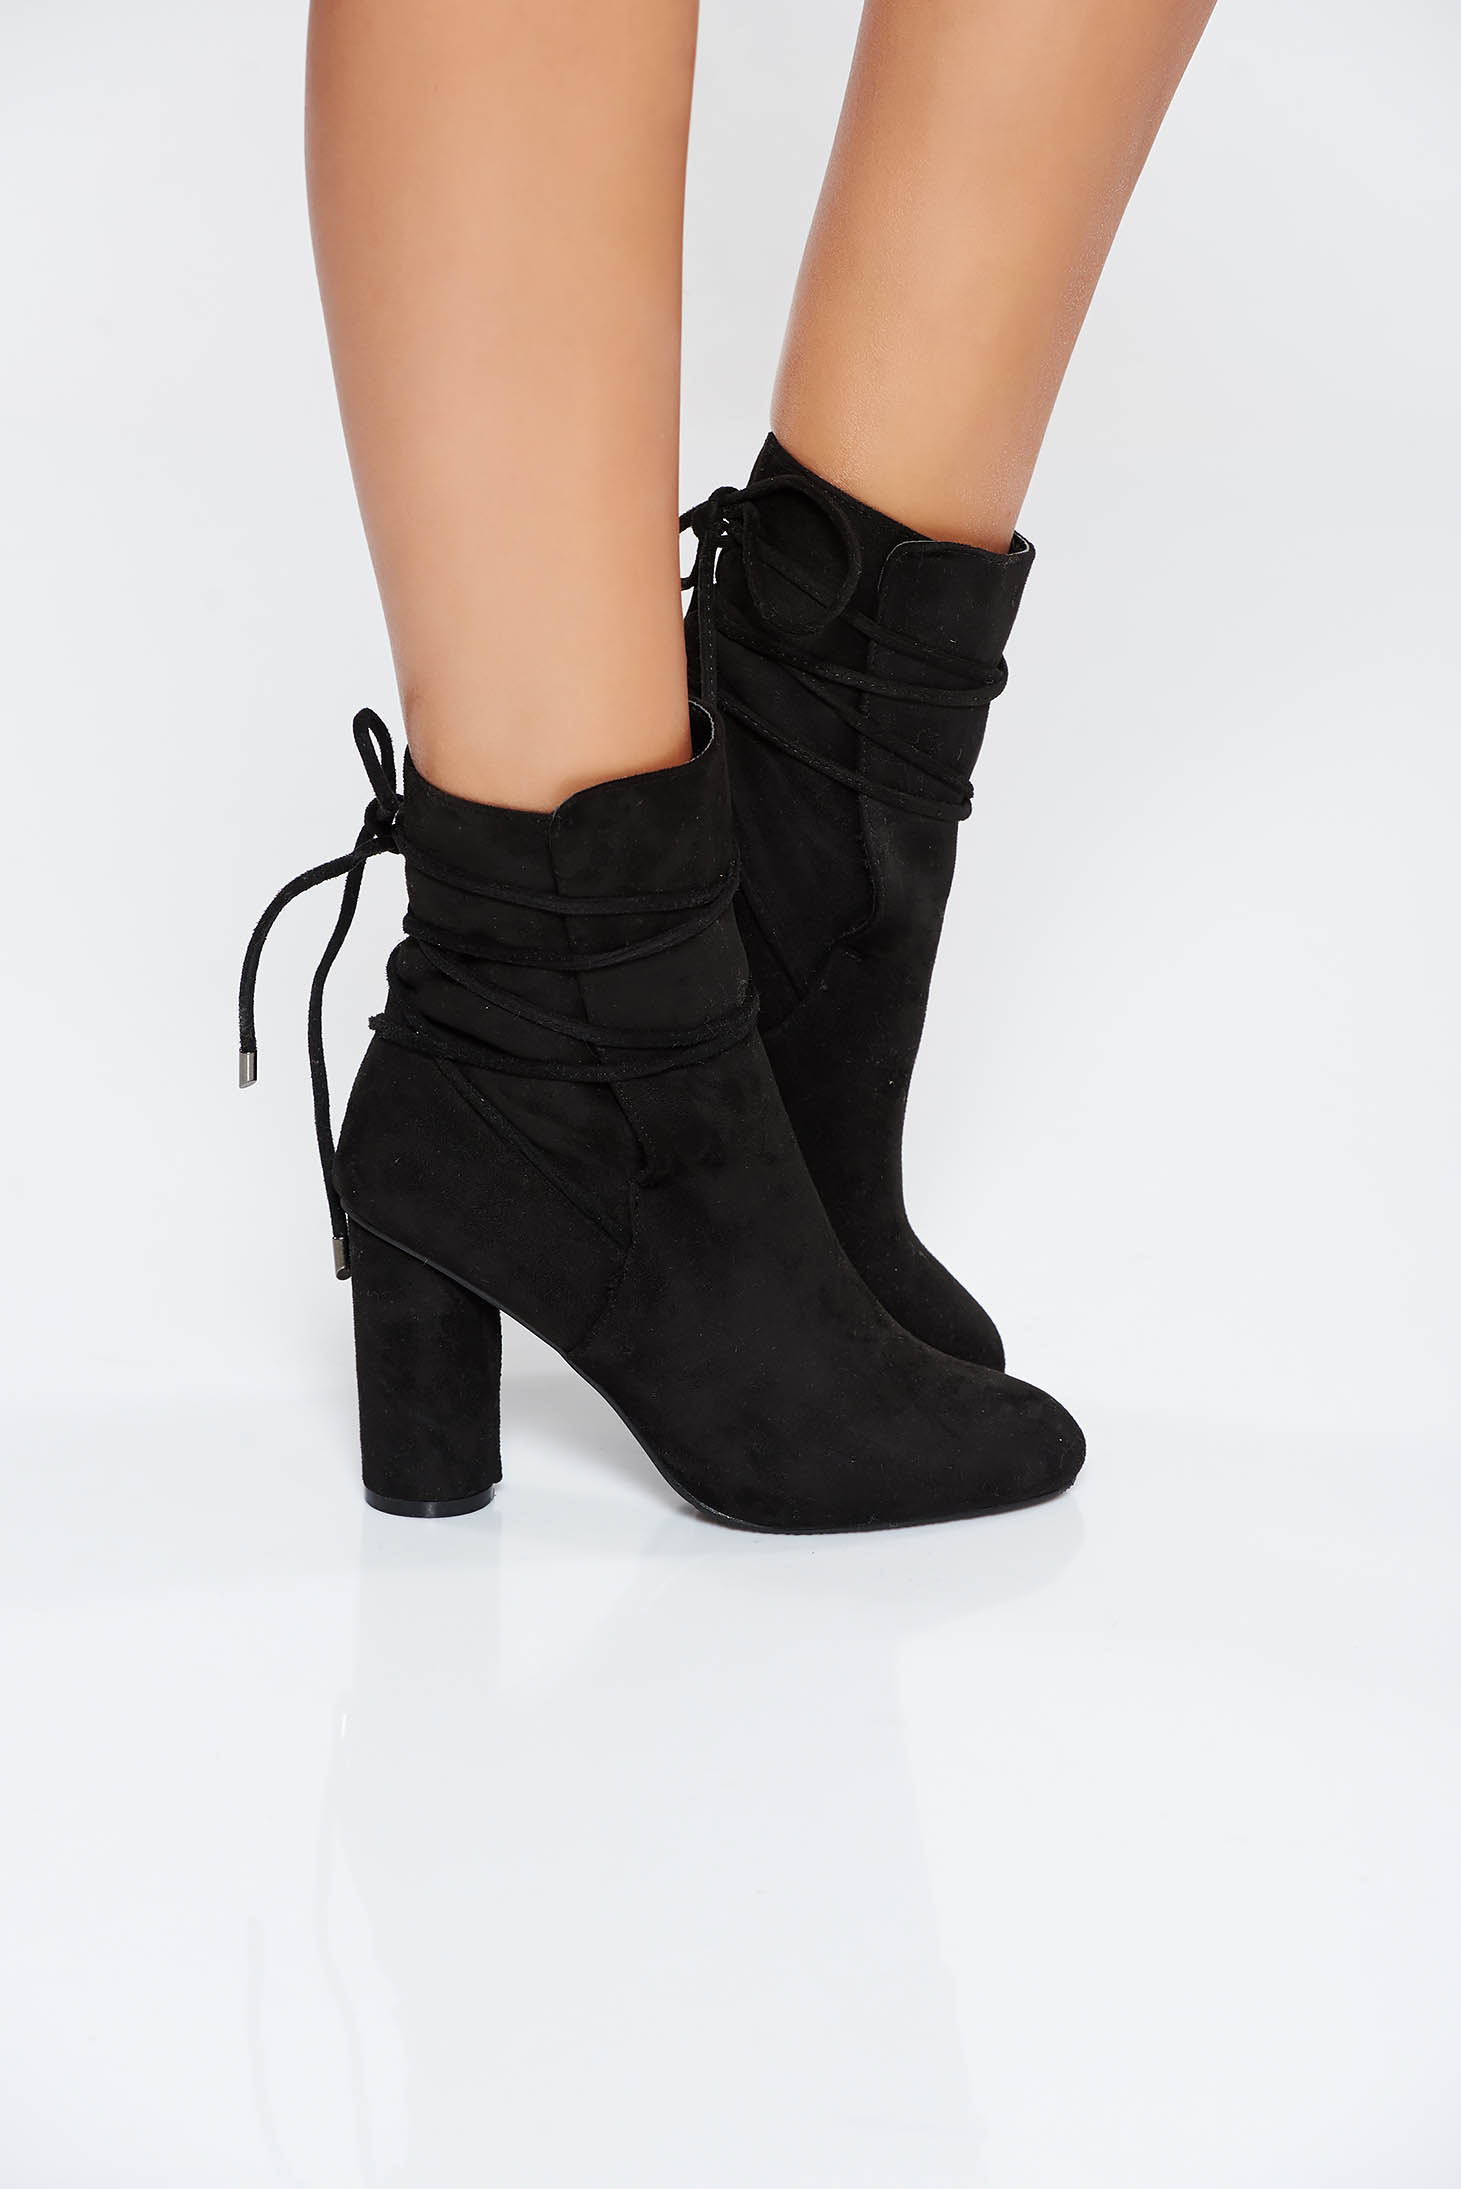 casual black ankle boots